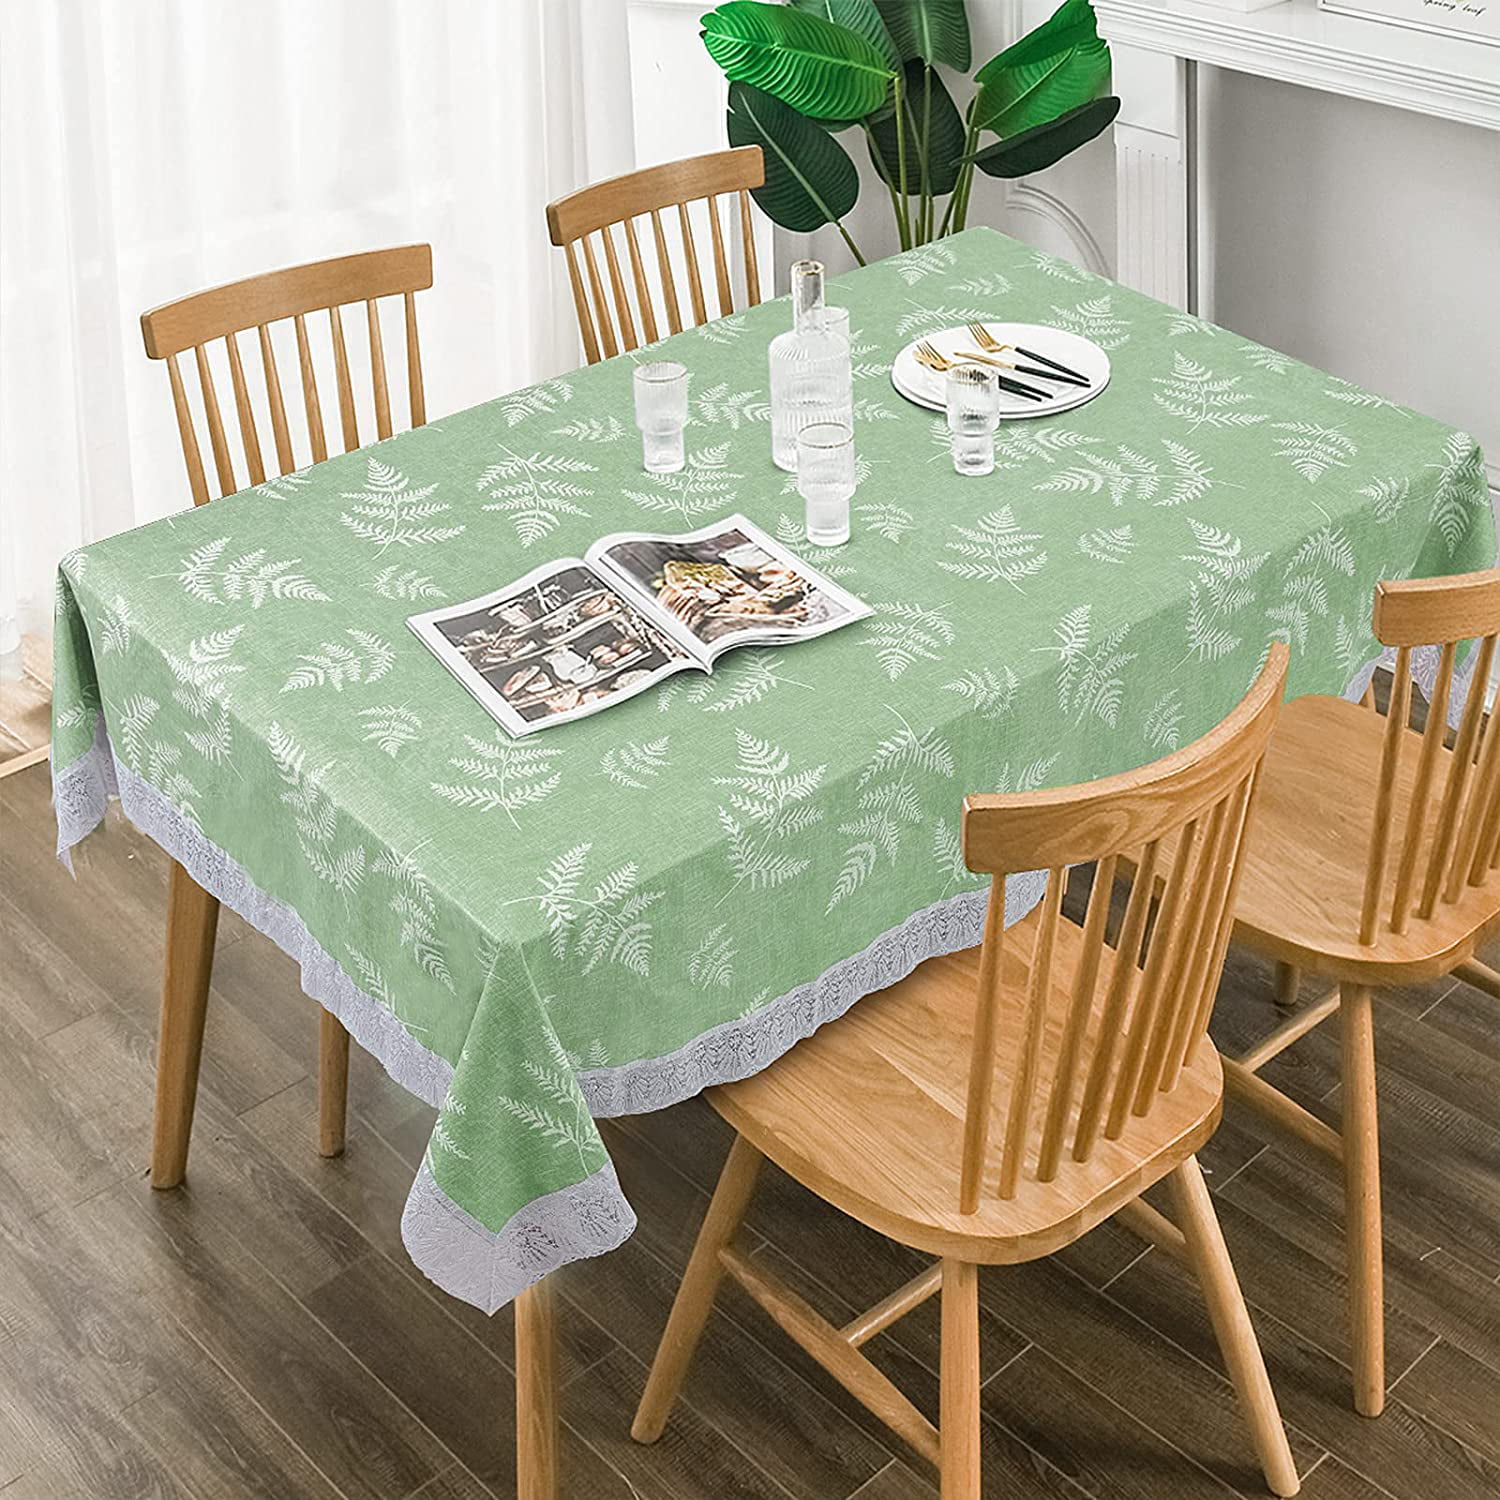 Modern PVC Vinyl Wipe Clean Tablecloth F852-1 ALL SIZES Code 